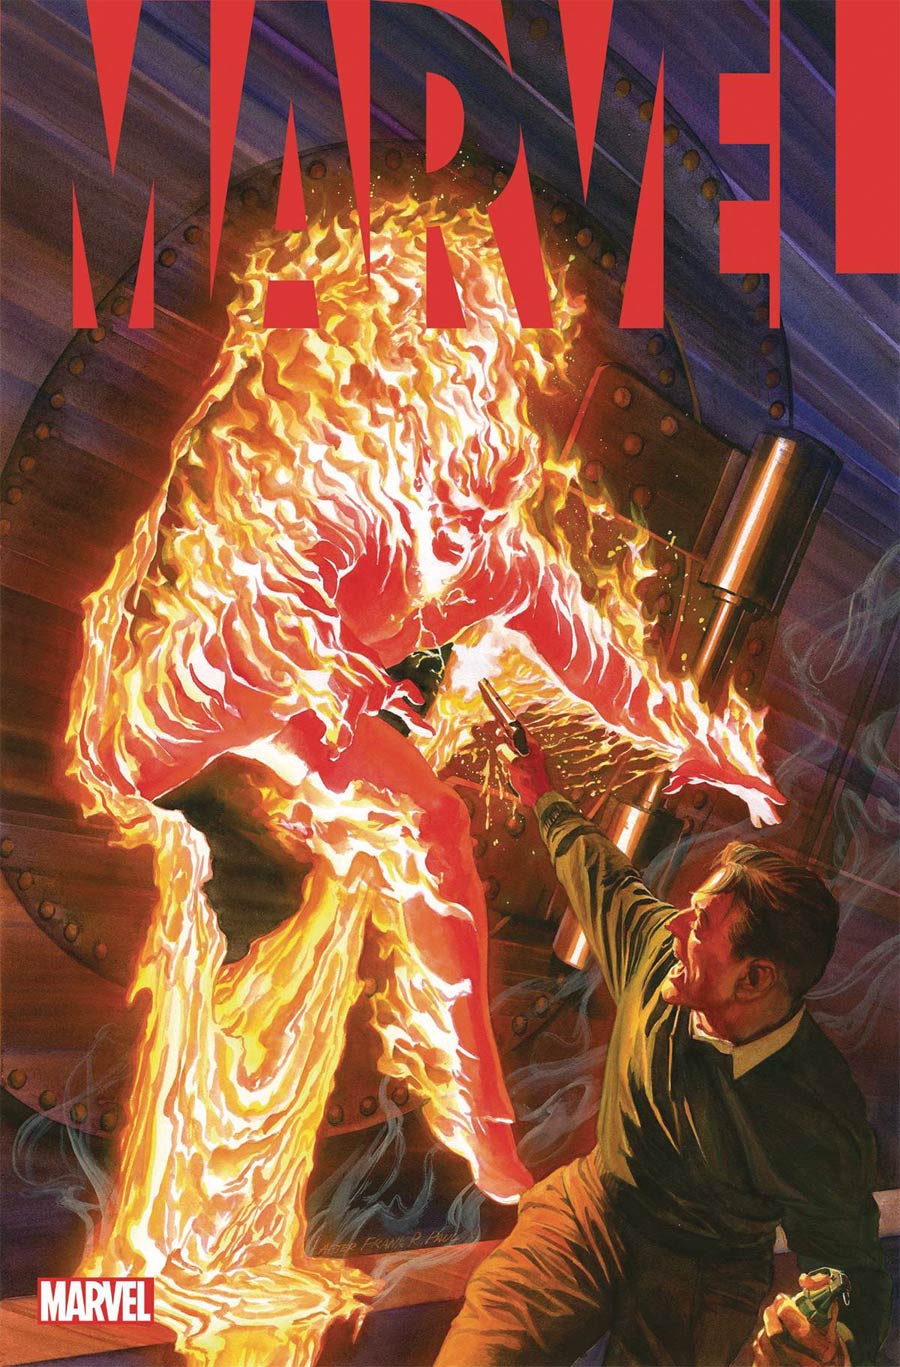 Marvel #1 By Alex Ross Poster